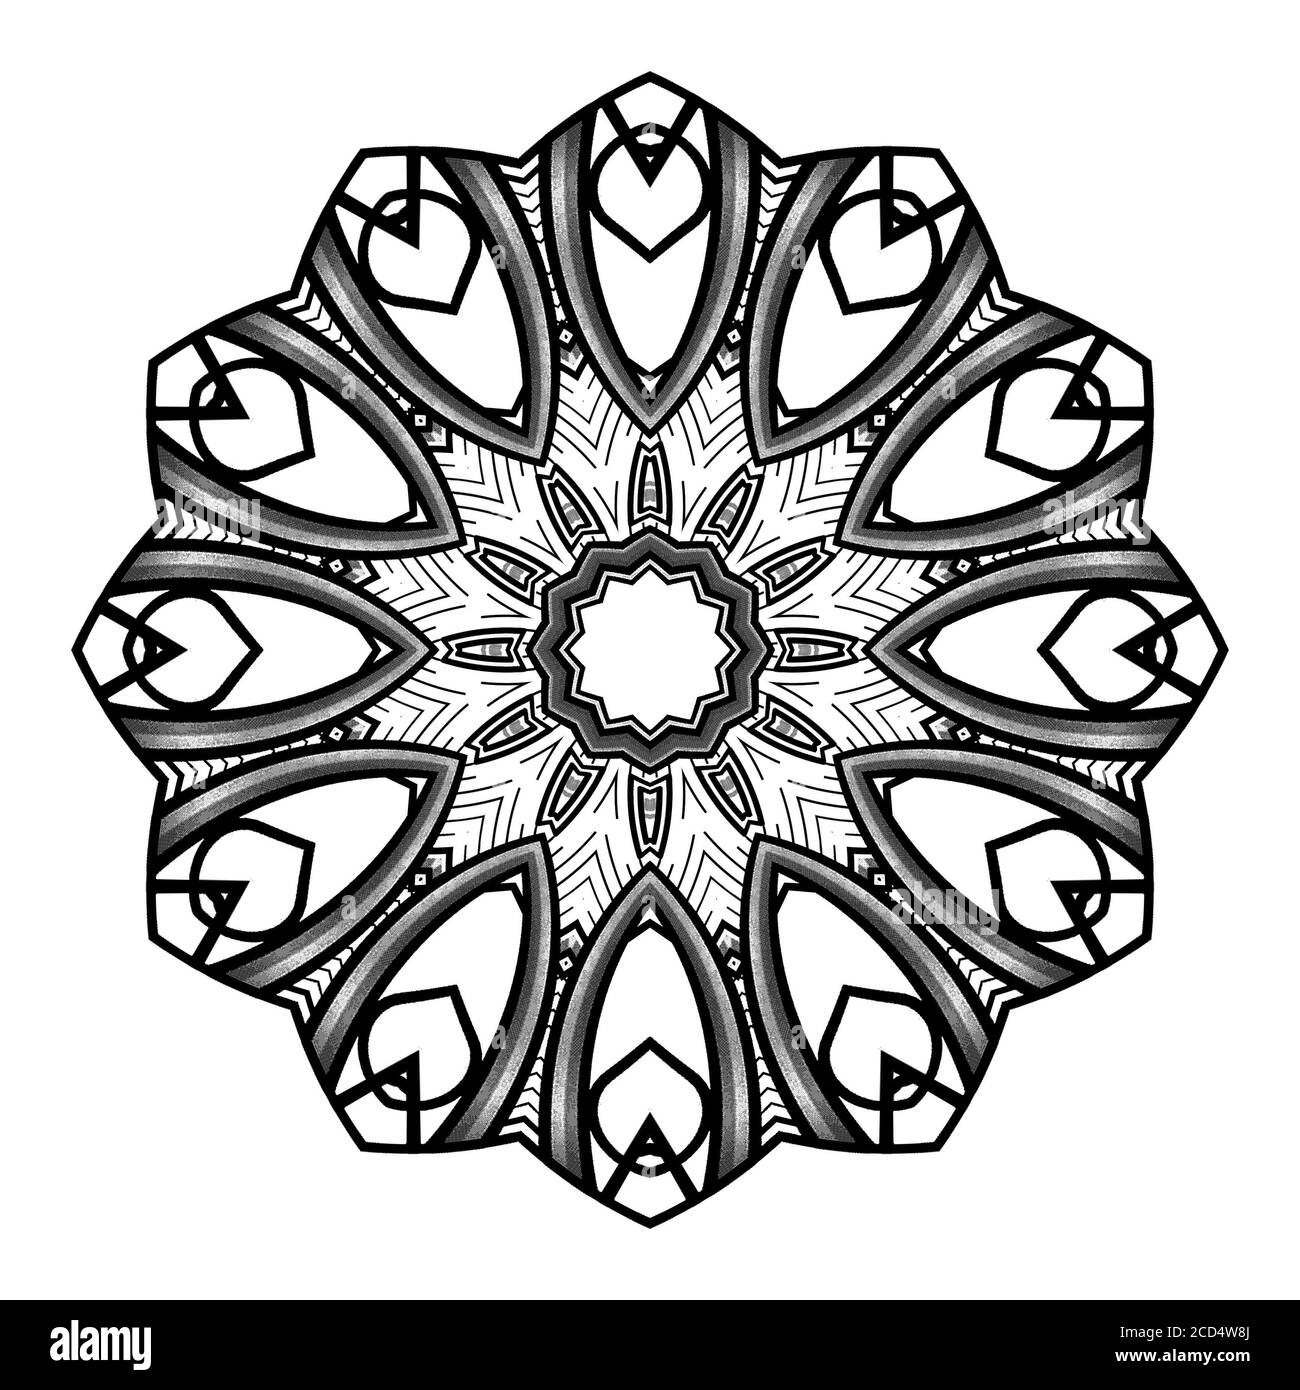 Beautiful and elegant monochromatic symmetrical mandala designs on solid sheet of wallpaper. Concept of home decor and interior designing. Stock Photo